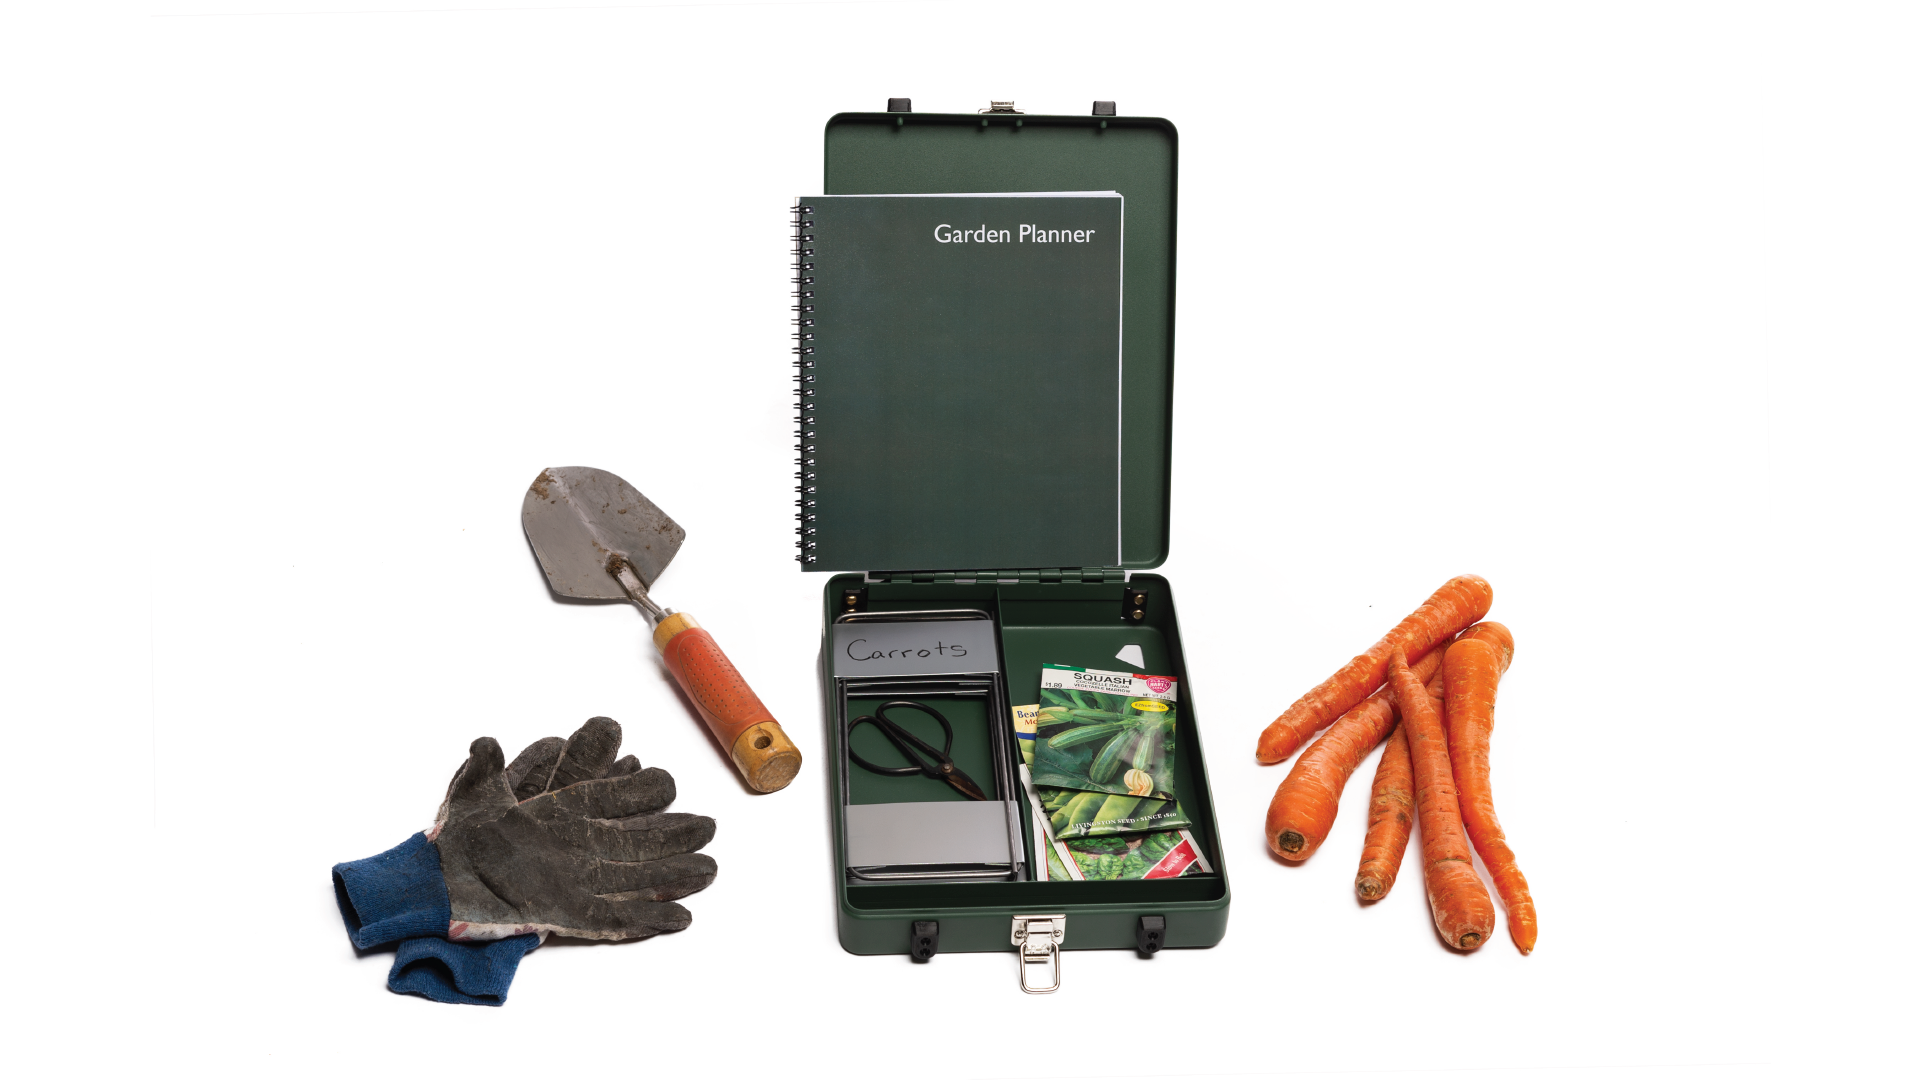 Green box open with gardening items inside. Outside the box there are gloves, a shovel and carrots (from left to right).